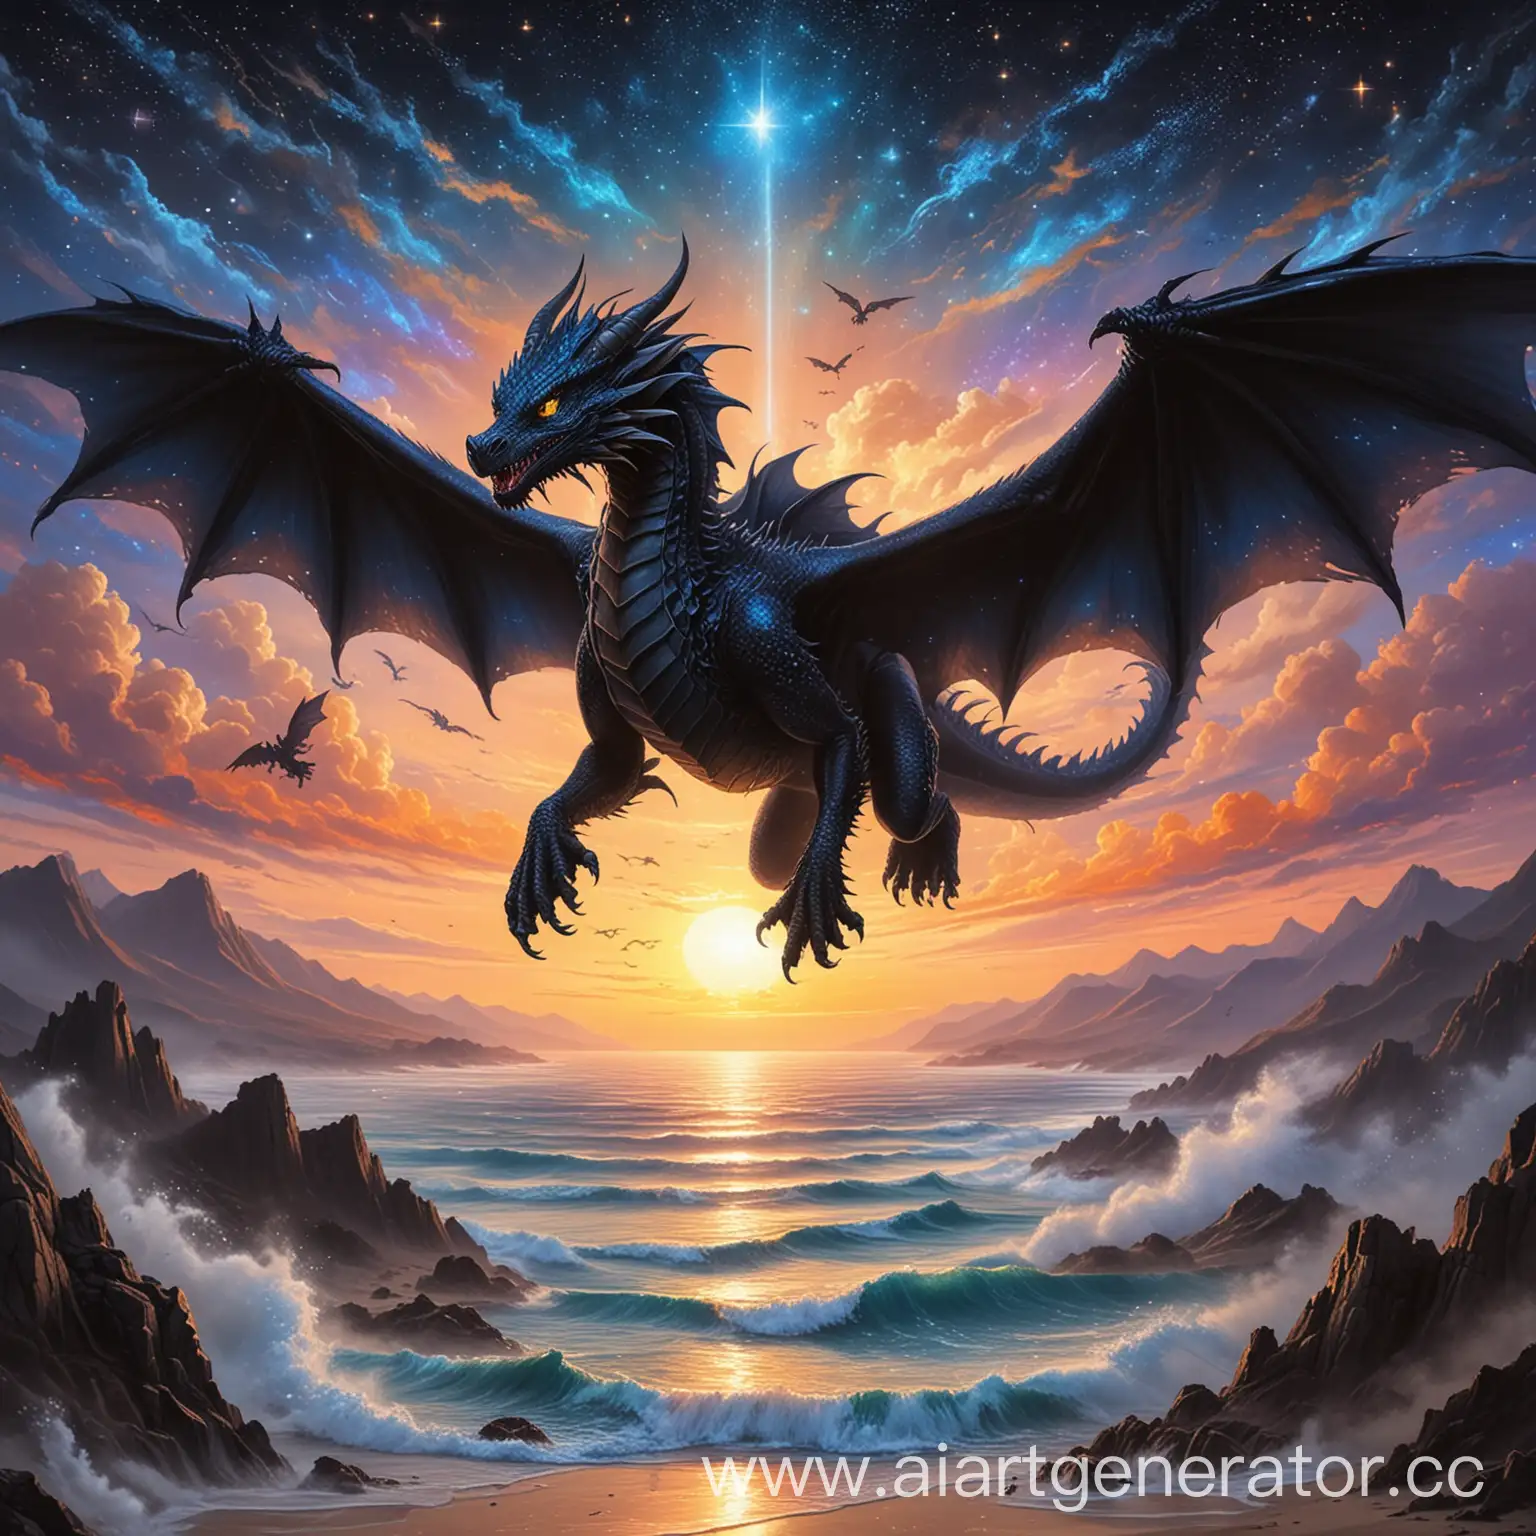 A black dragon with 4 legs and blue eyes flies into the sunset, under its wings the starry sky